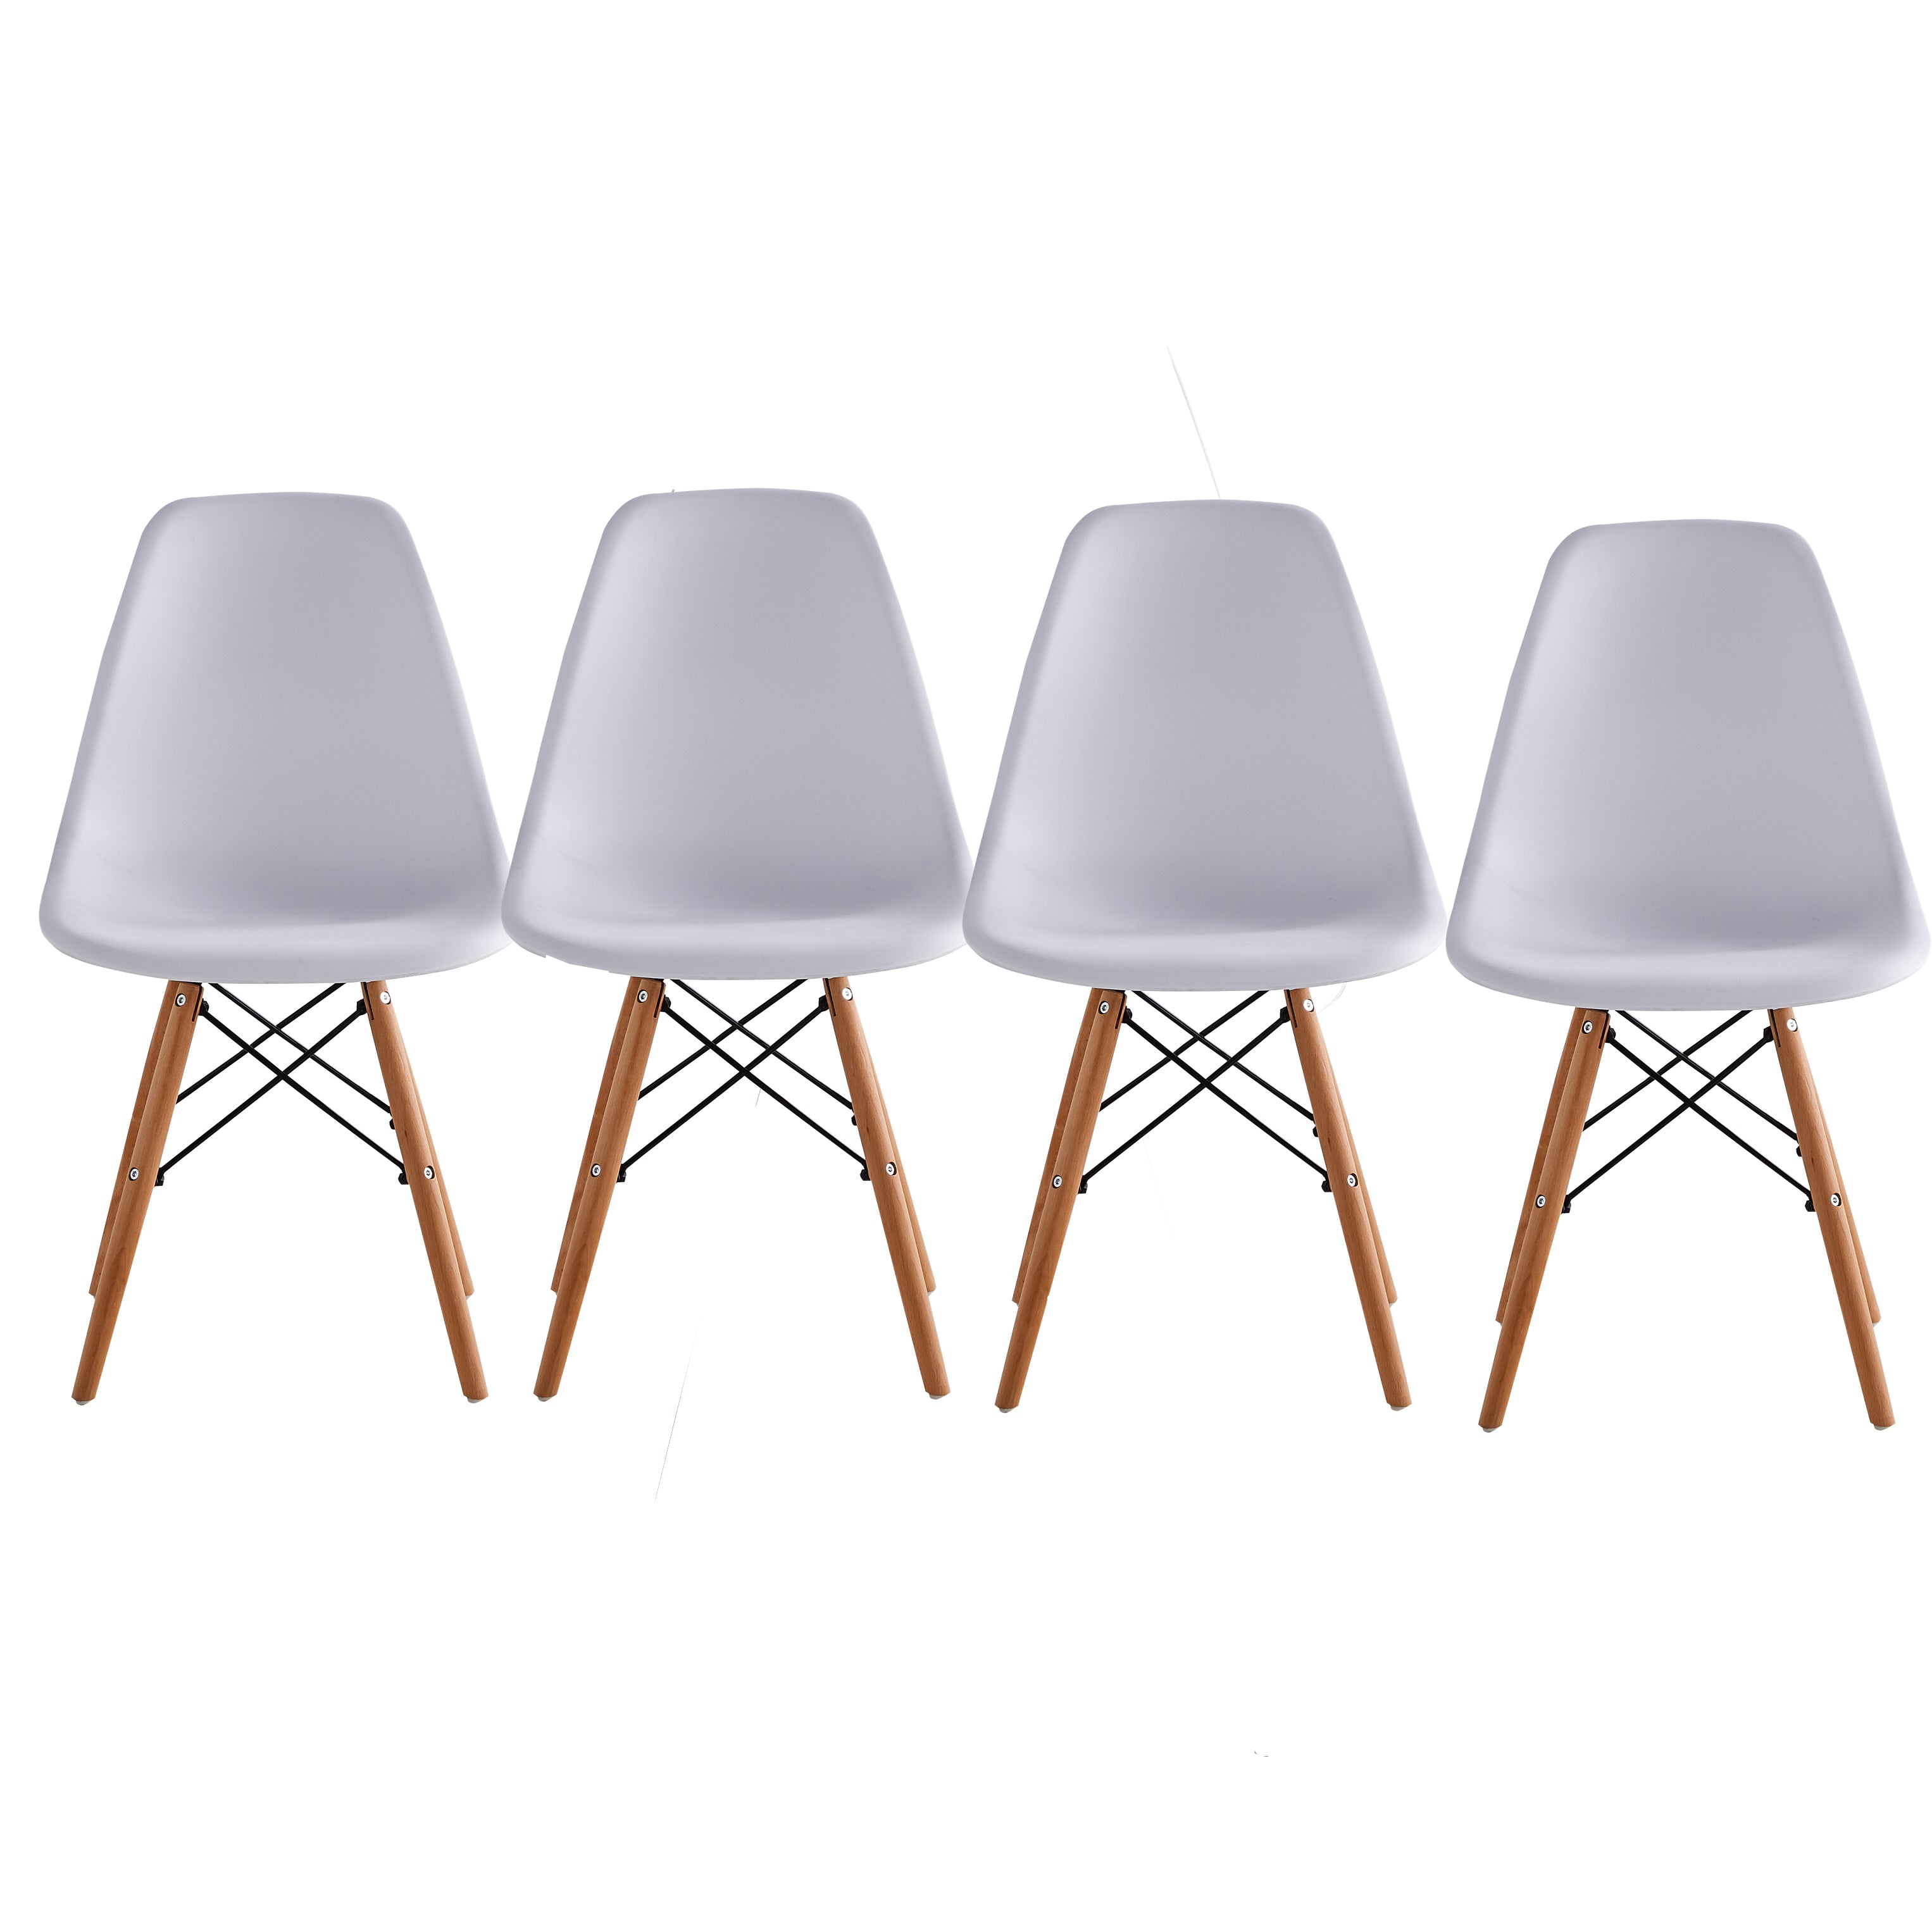 Eames Chair CR-PP623 4-in-1 multi-functional design furniture3